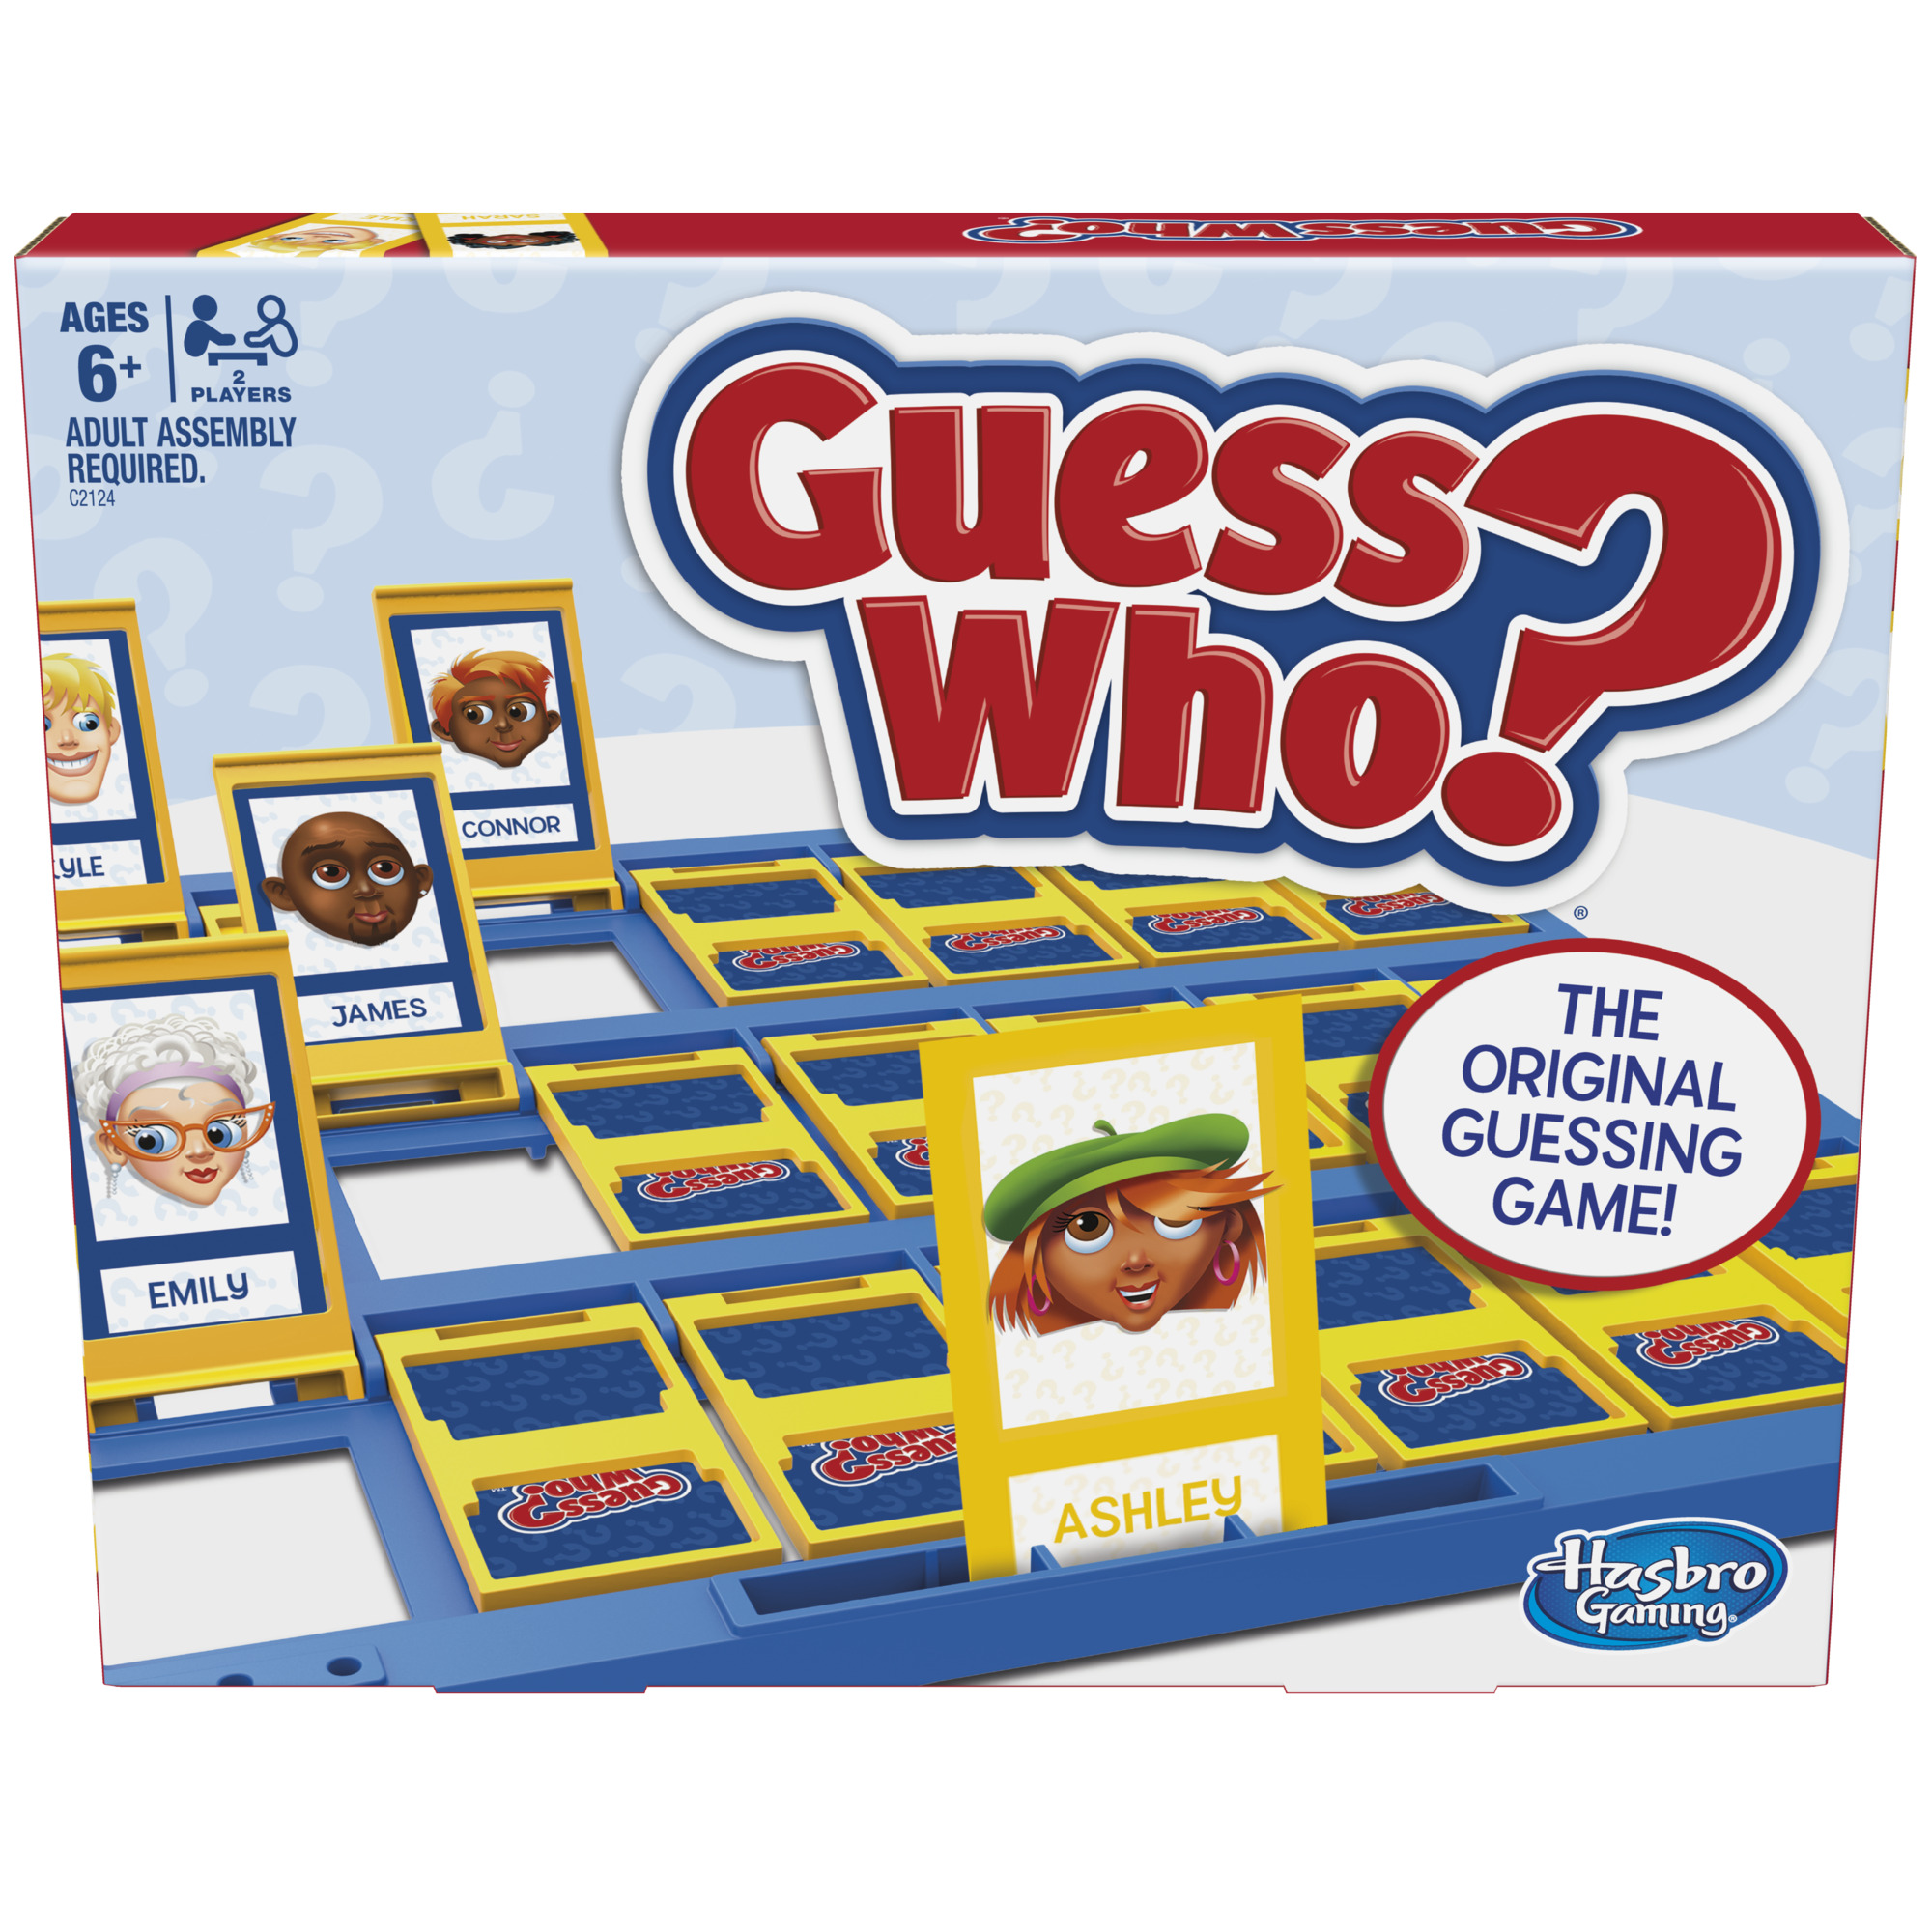 Guess Who? Original Guessing Game Board Game for Kids and Family Ages 6 and Up, 2 Players - image 1 of 10